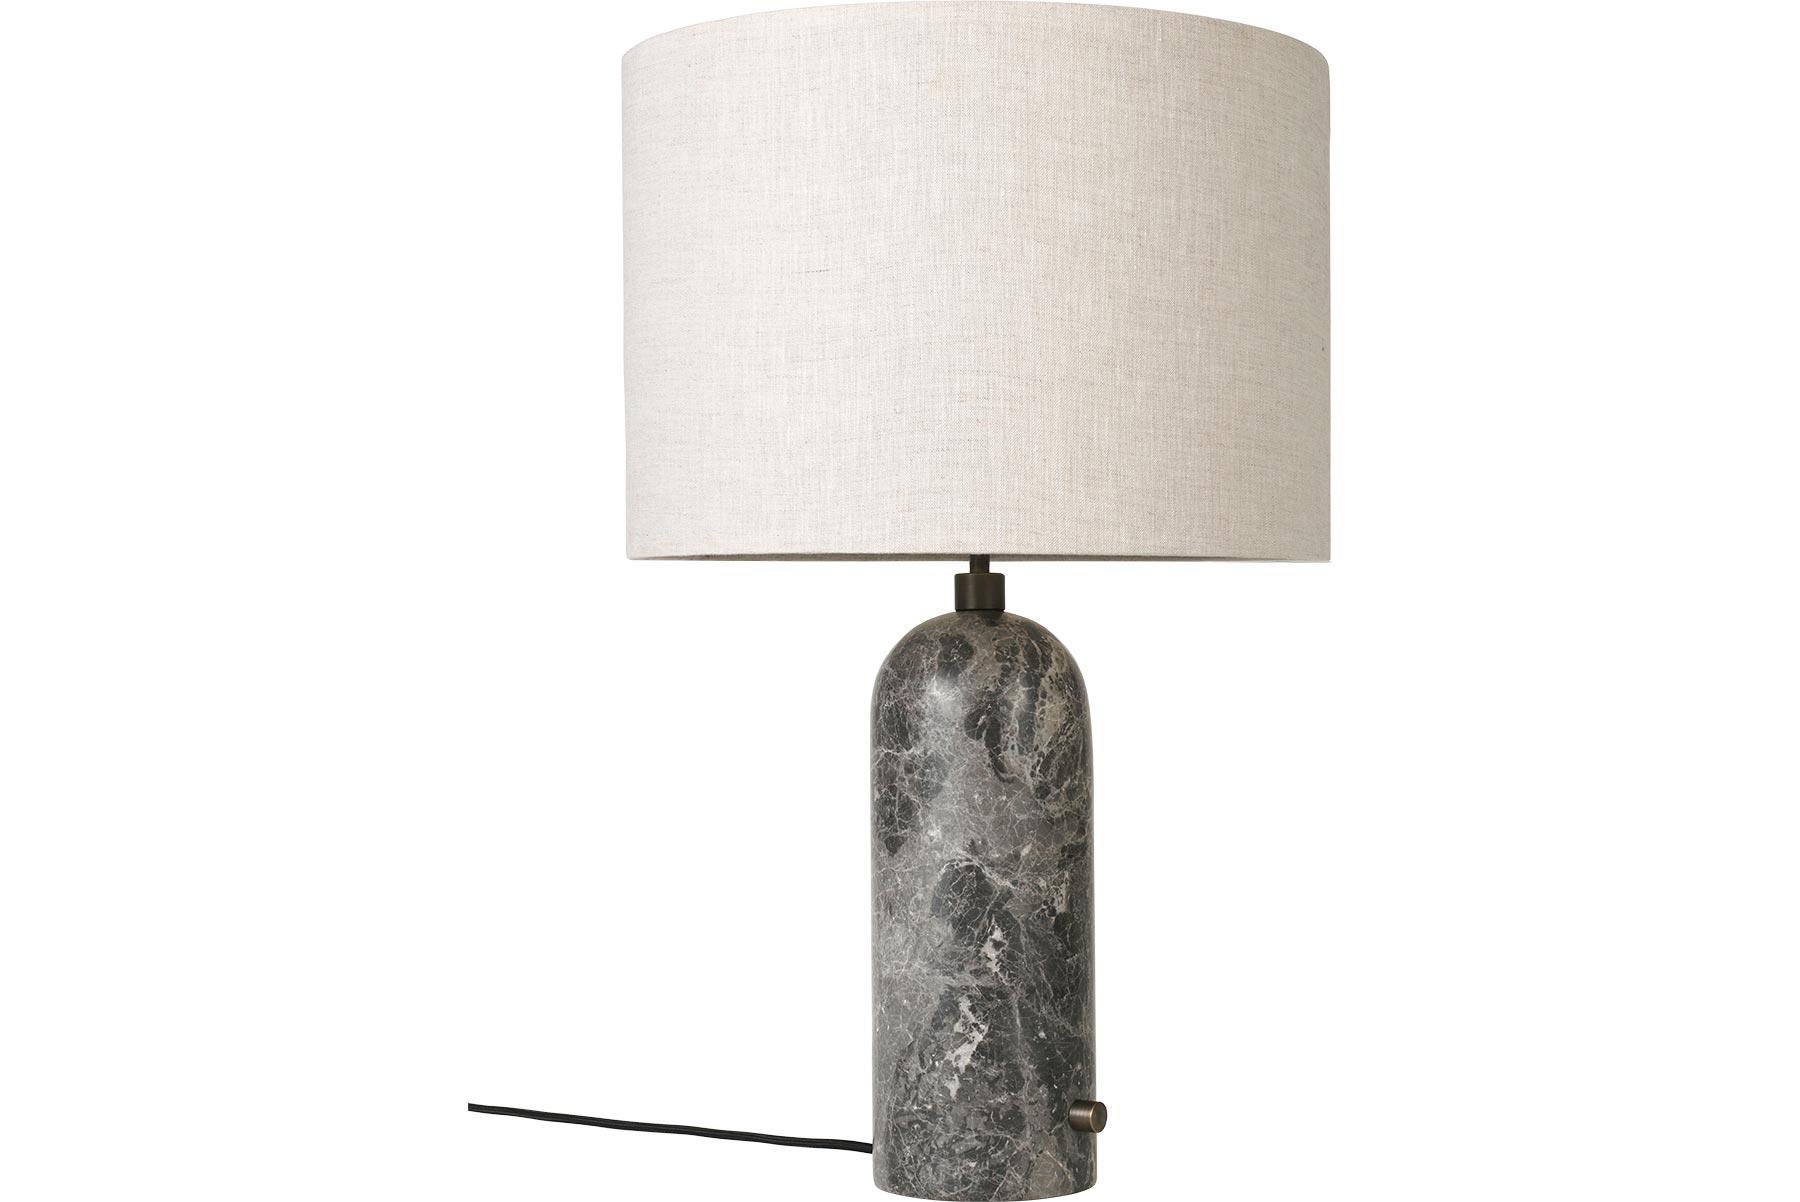 Steel Gravity Table Lamp - Large, Grey Marble, White For Sale